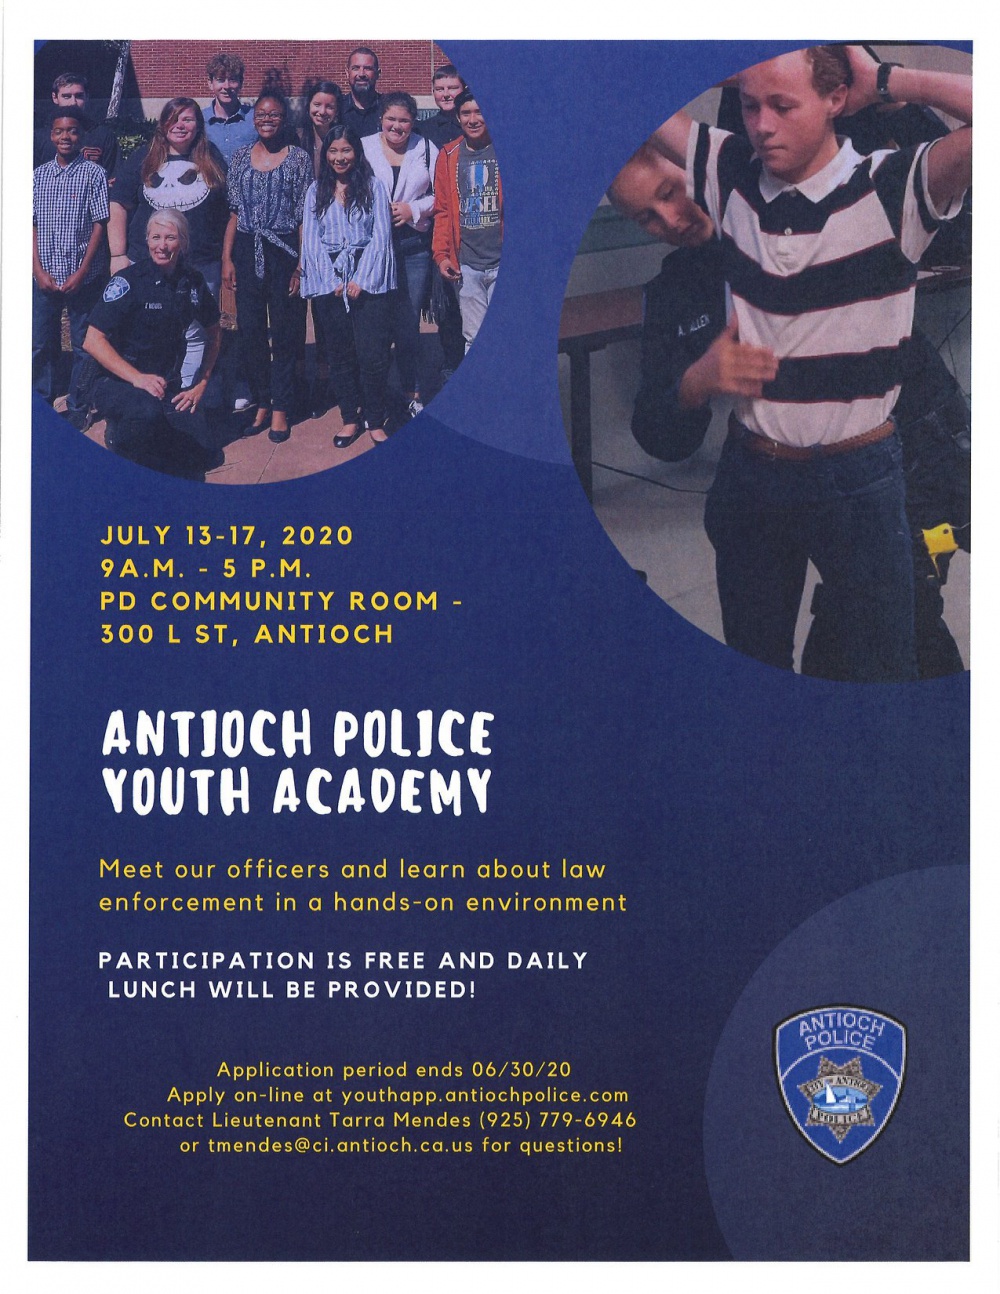 Antioch Police Youth Academy